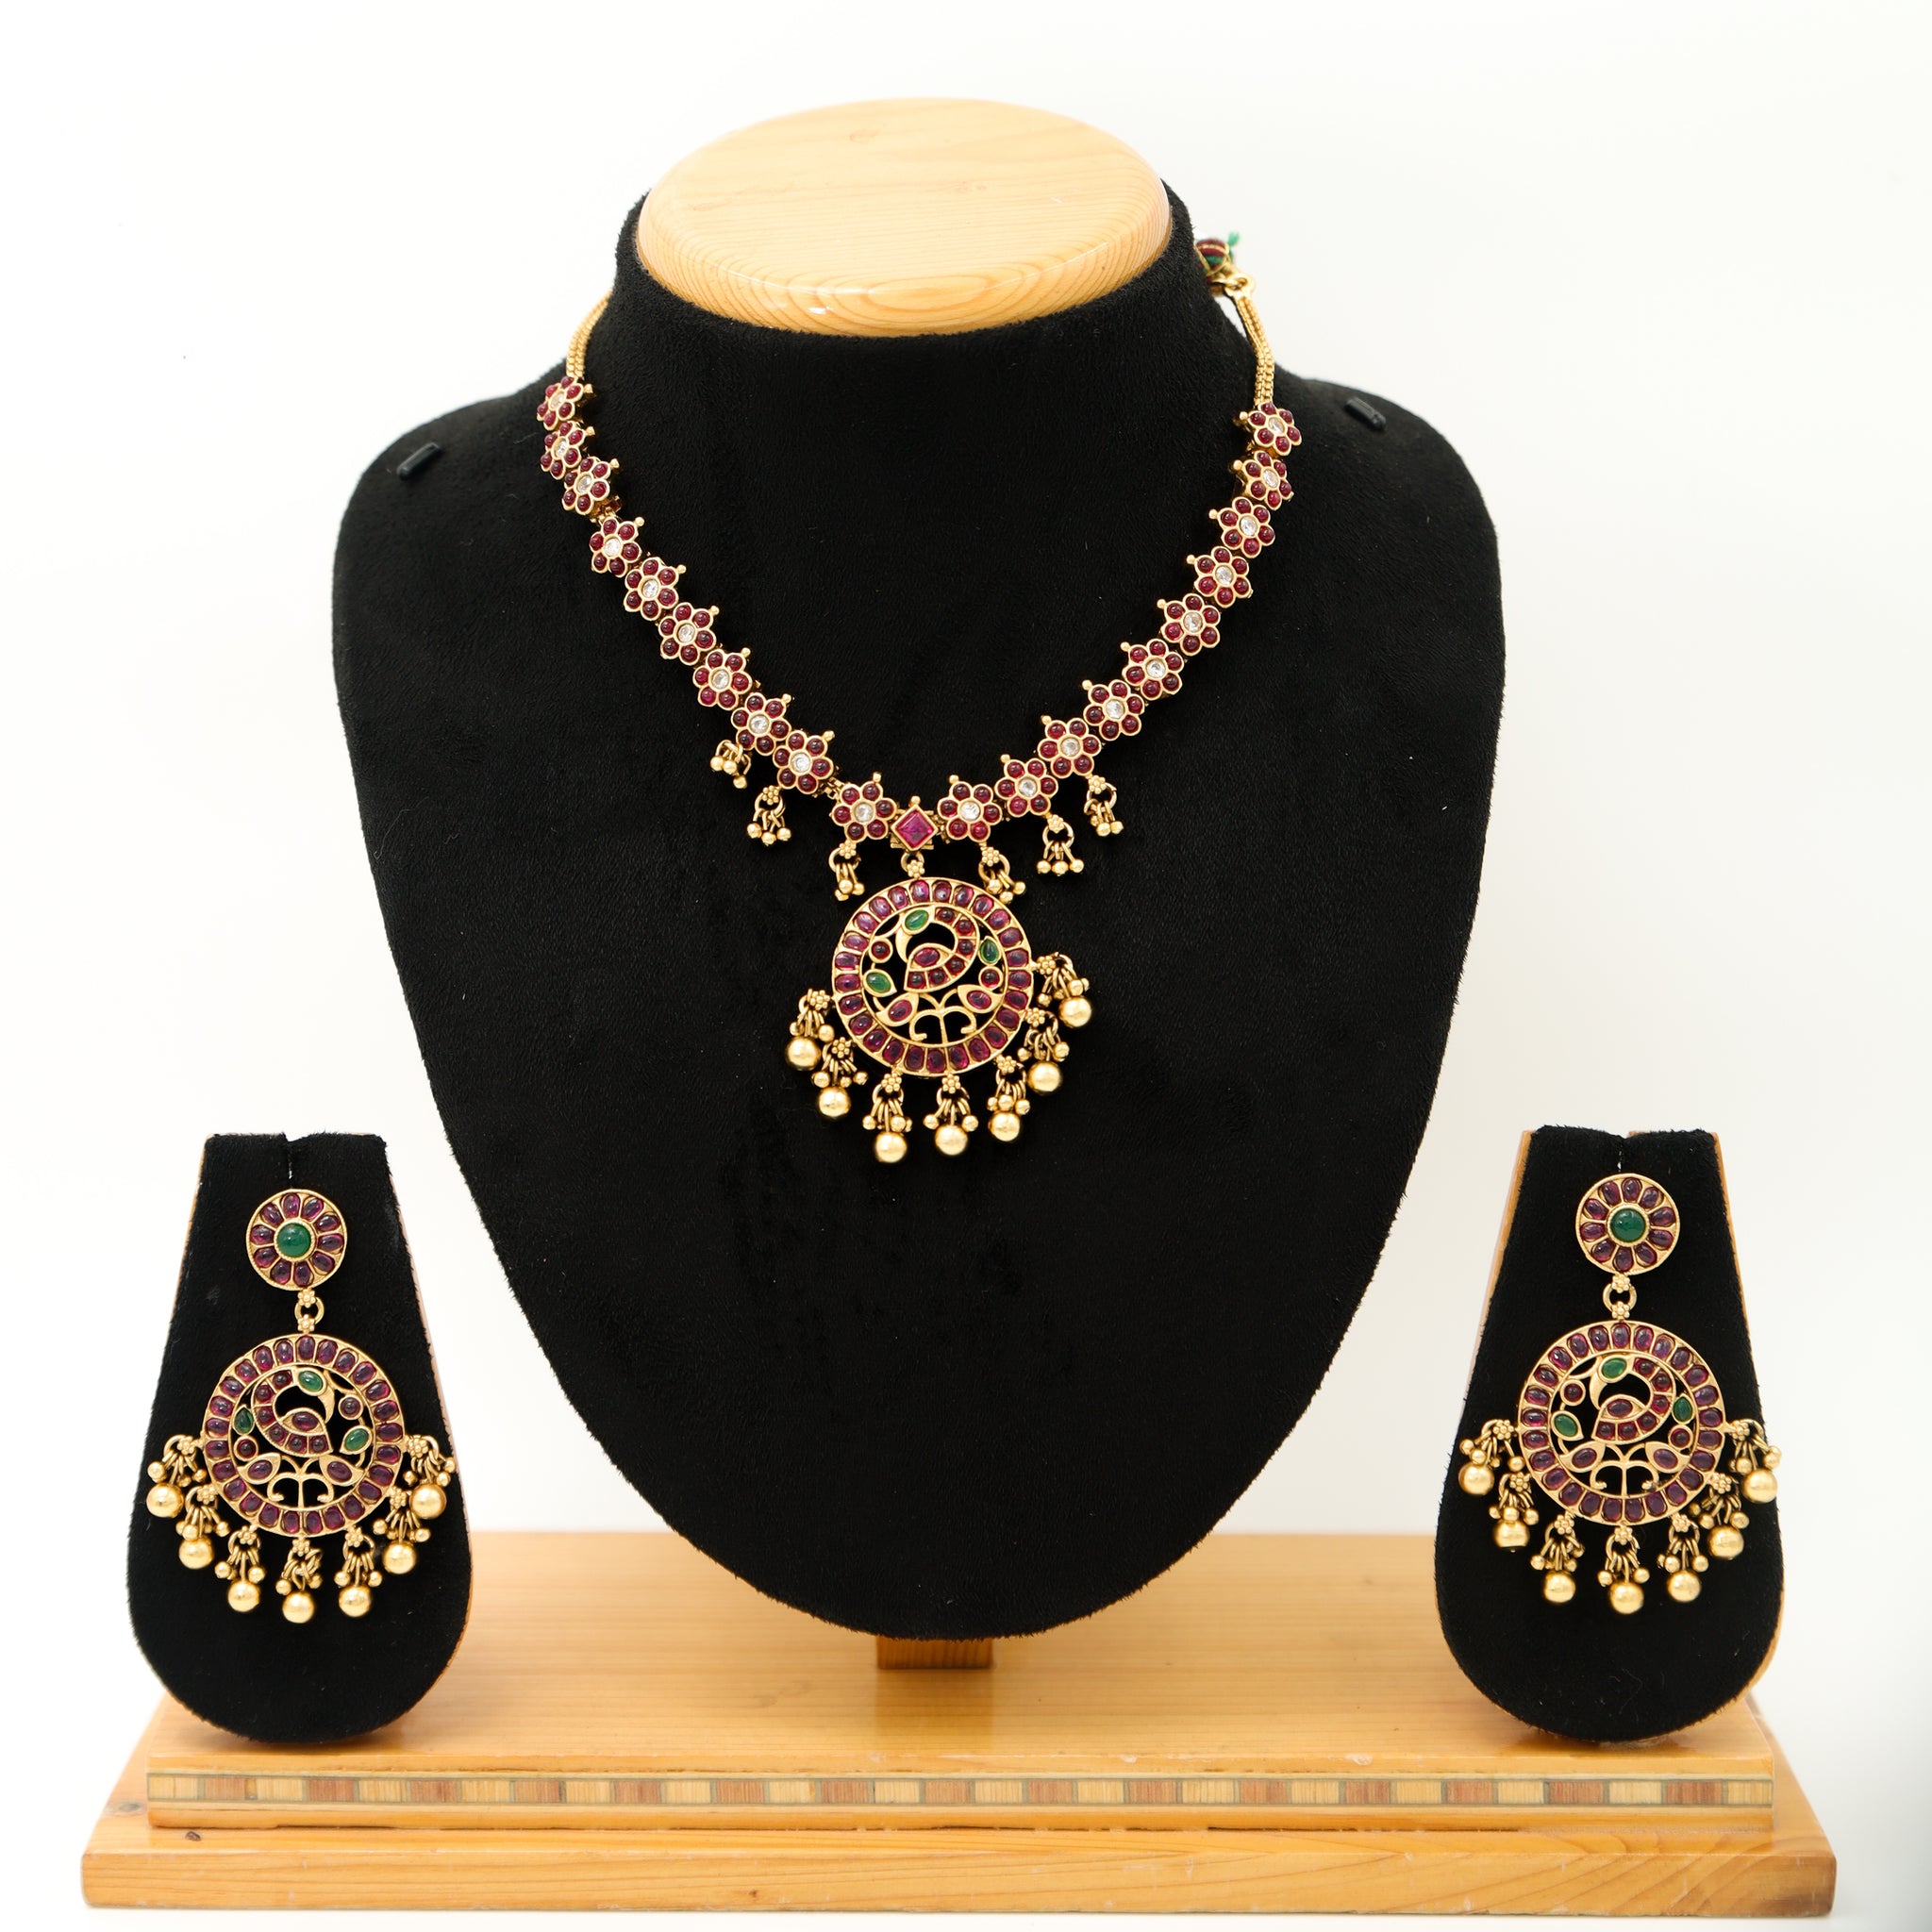 Antique Gold Plated Round Neck Necklace Set 9942-28